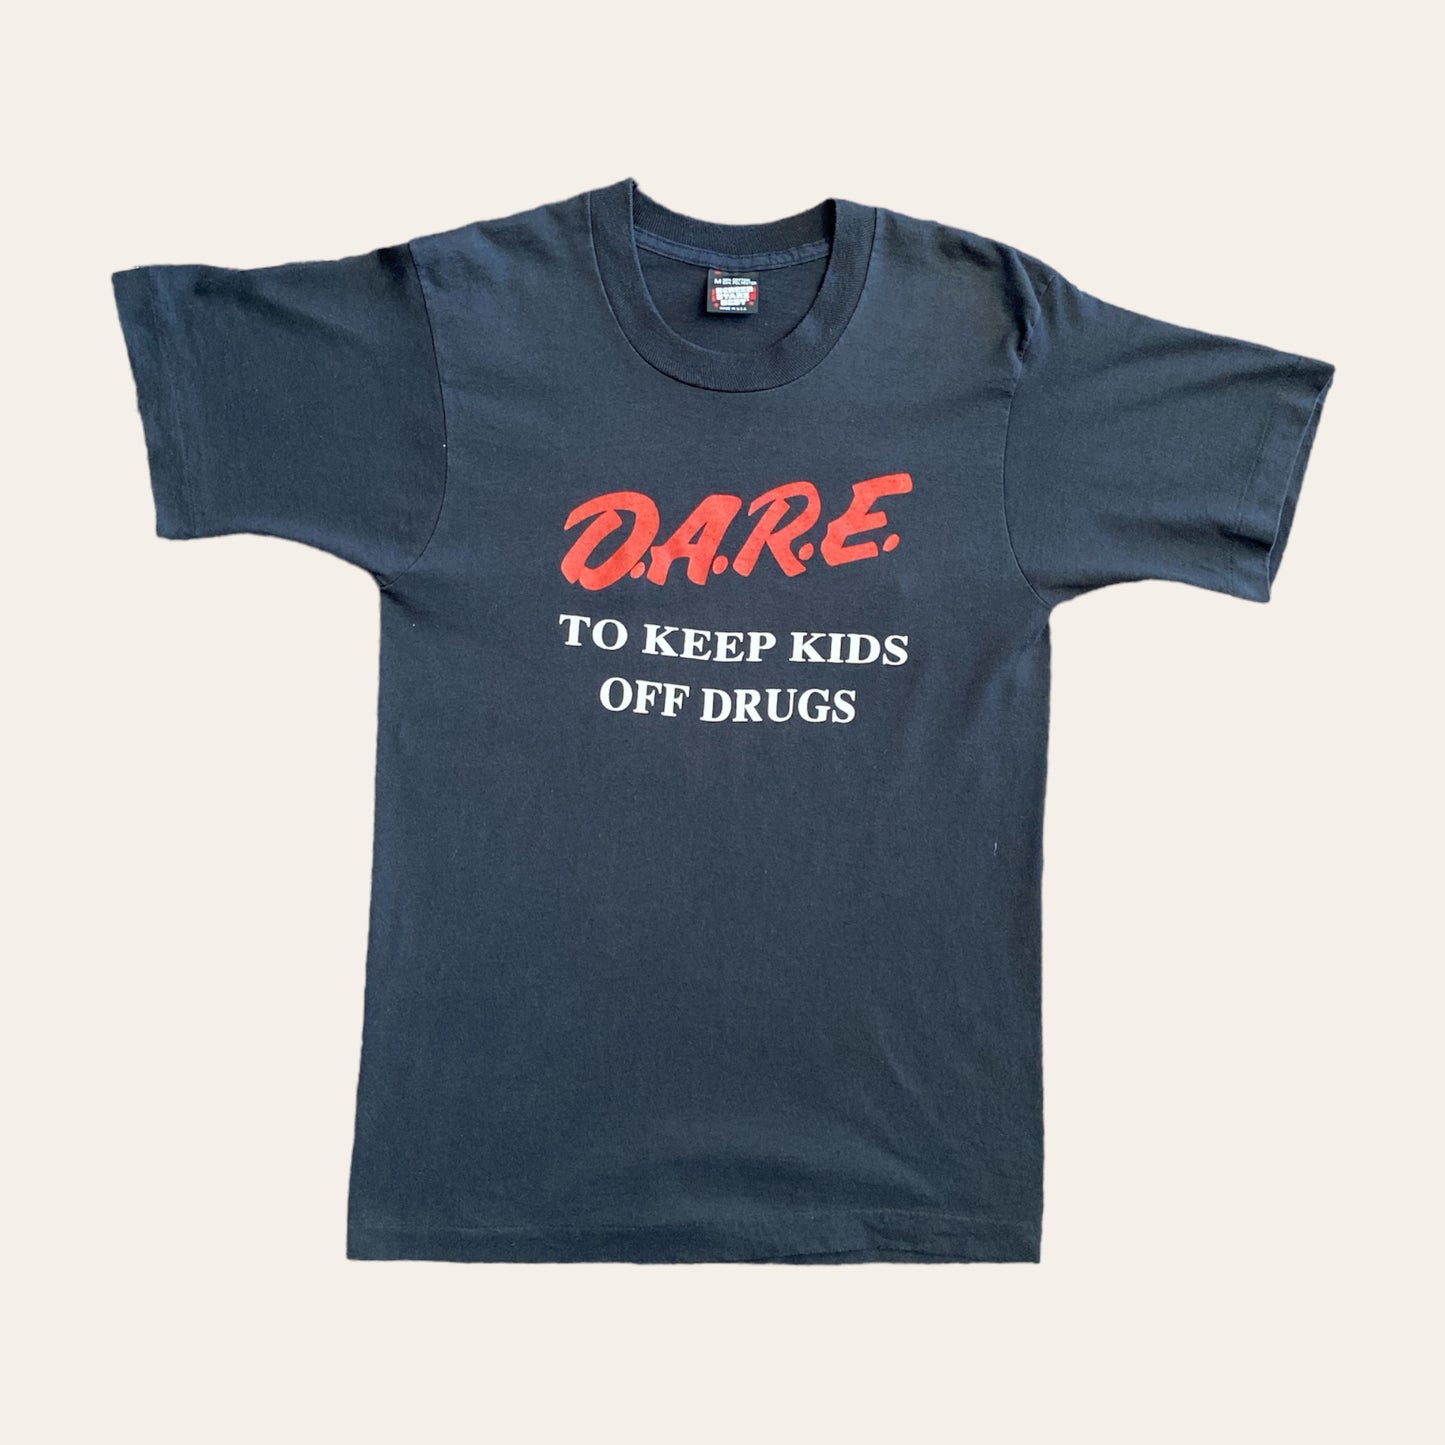 DARE 'To Keep Kids Off Drugs' Tee Size M